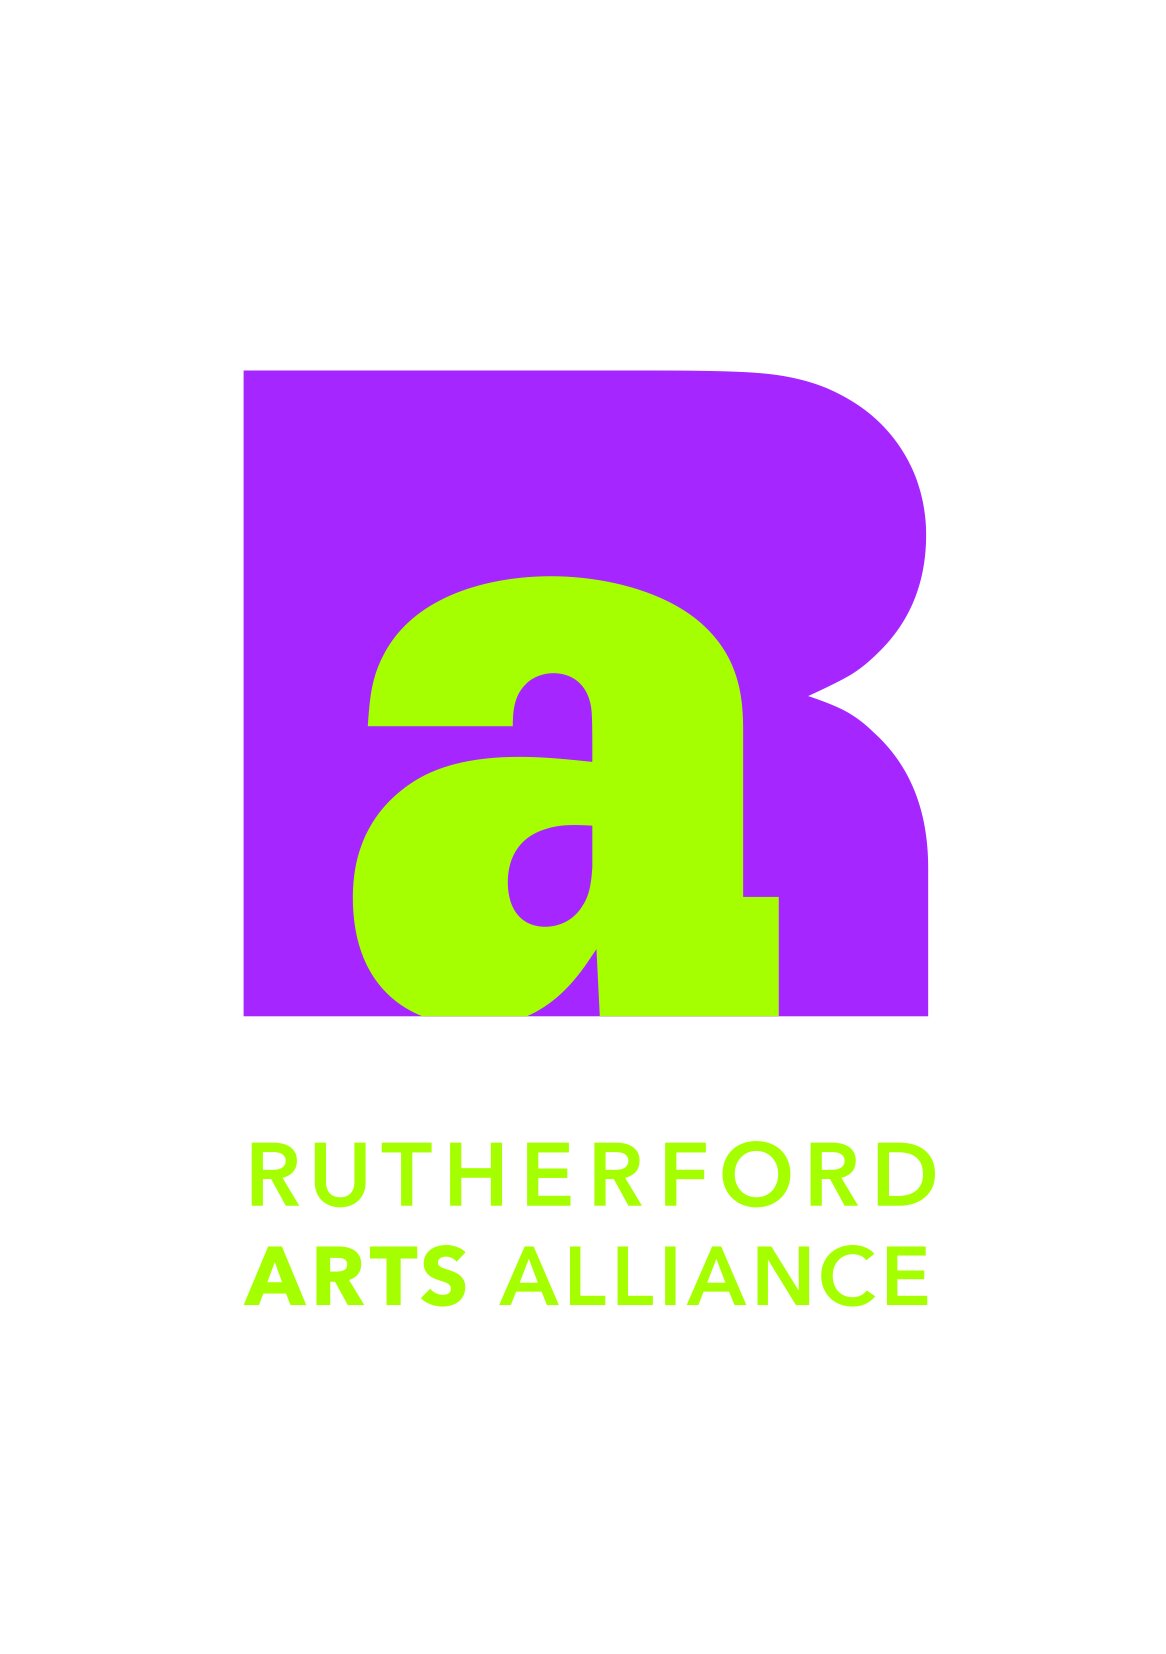 Rutherford Arts Alliance logo